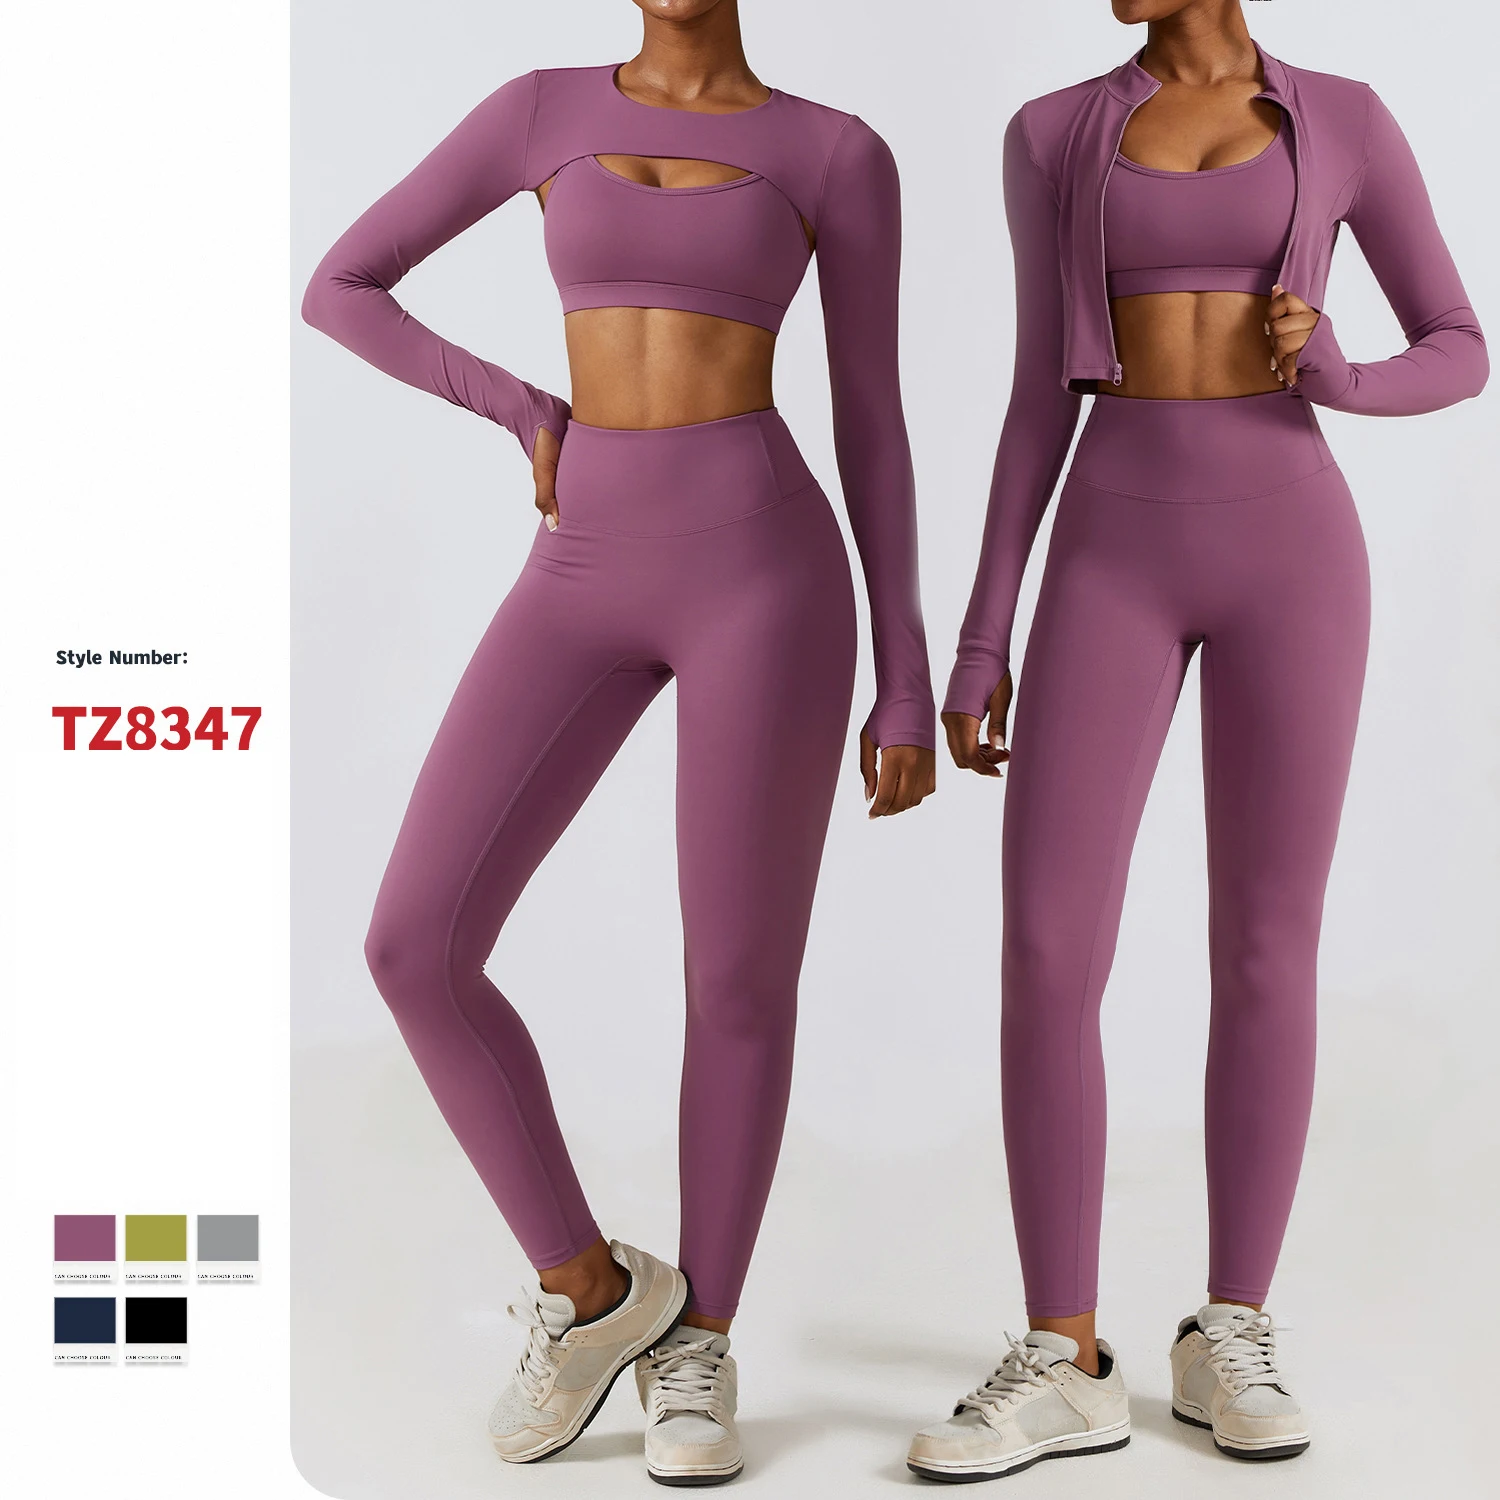 Three Piece Workout Set Women Clothing Camisole Sports Bra And Leggings ...